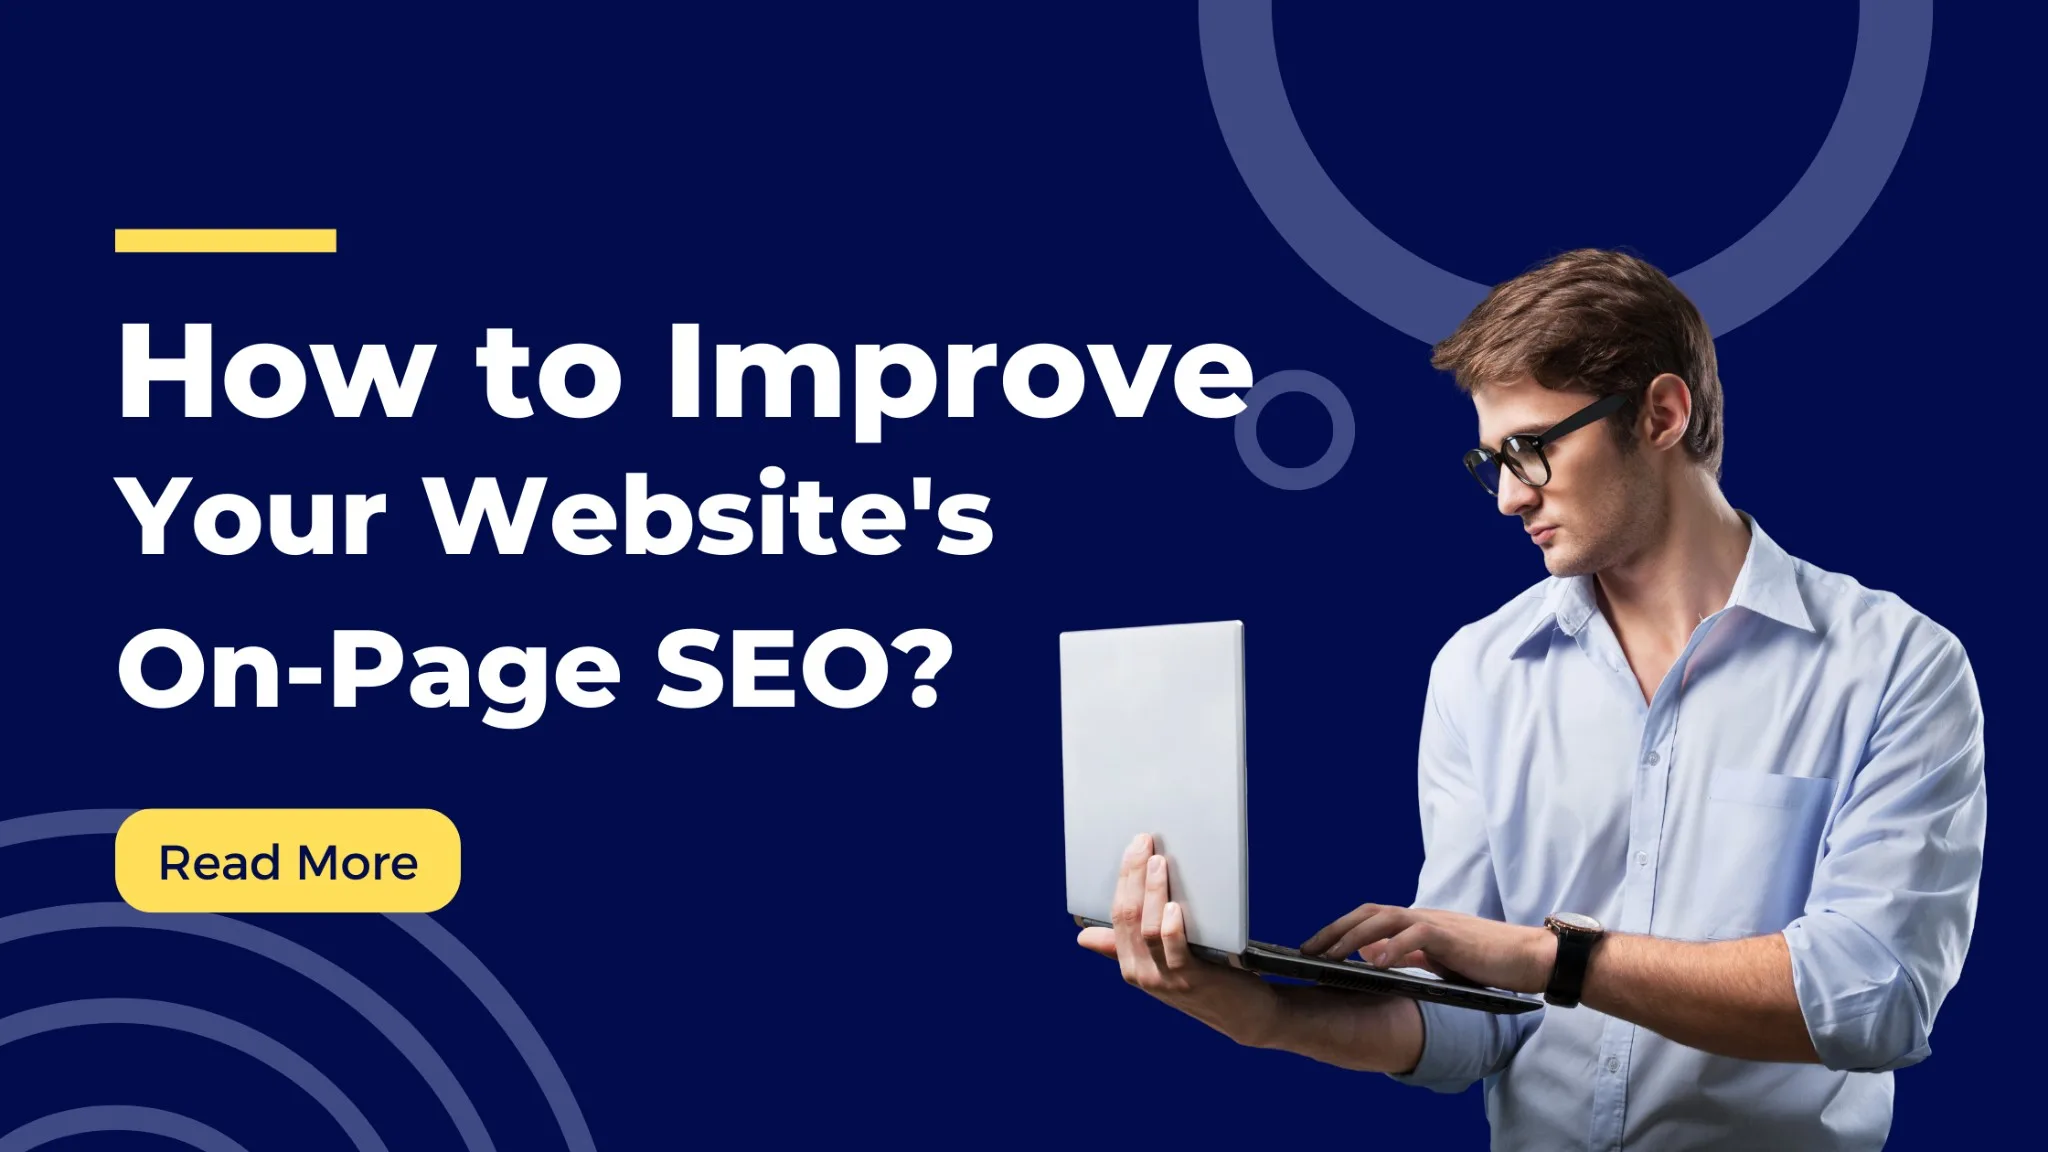 How to Improve Your Website's On-Page SEO?